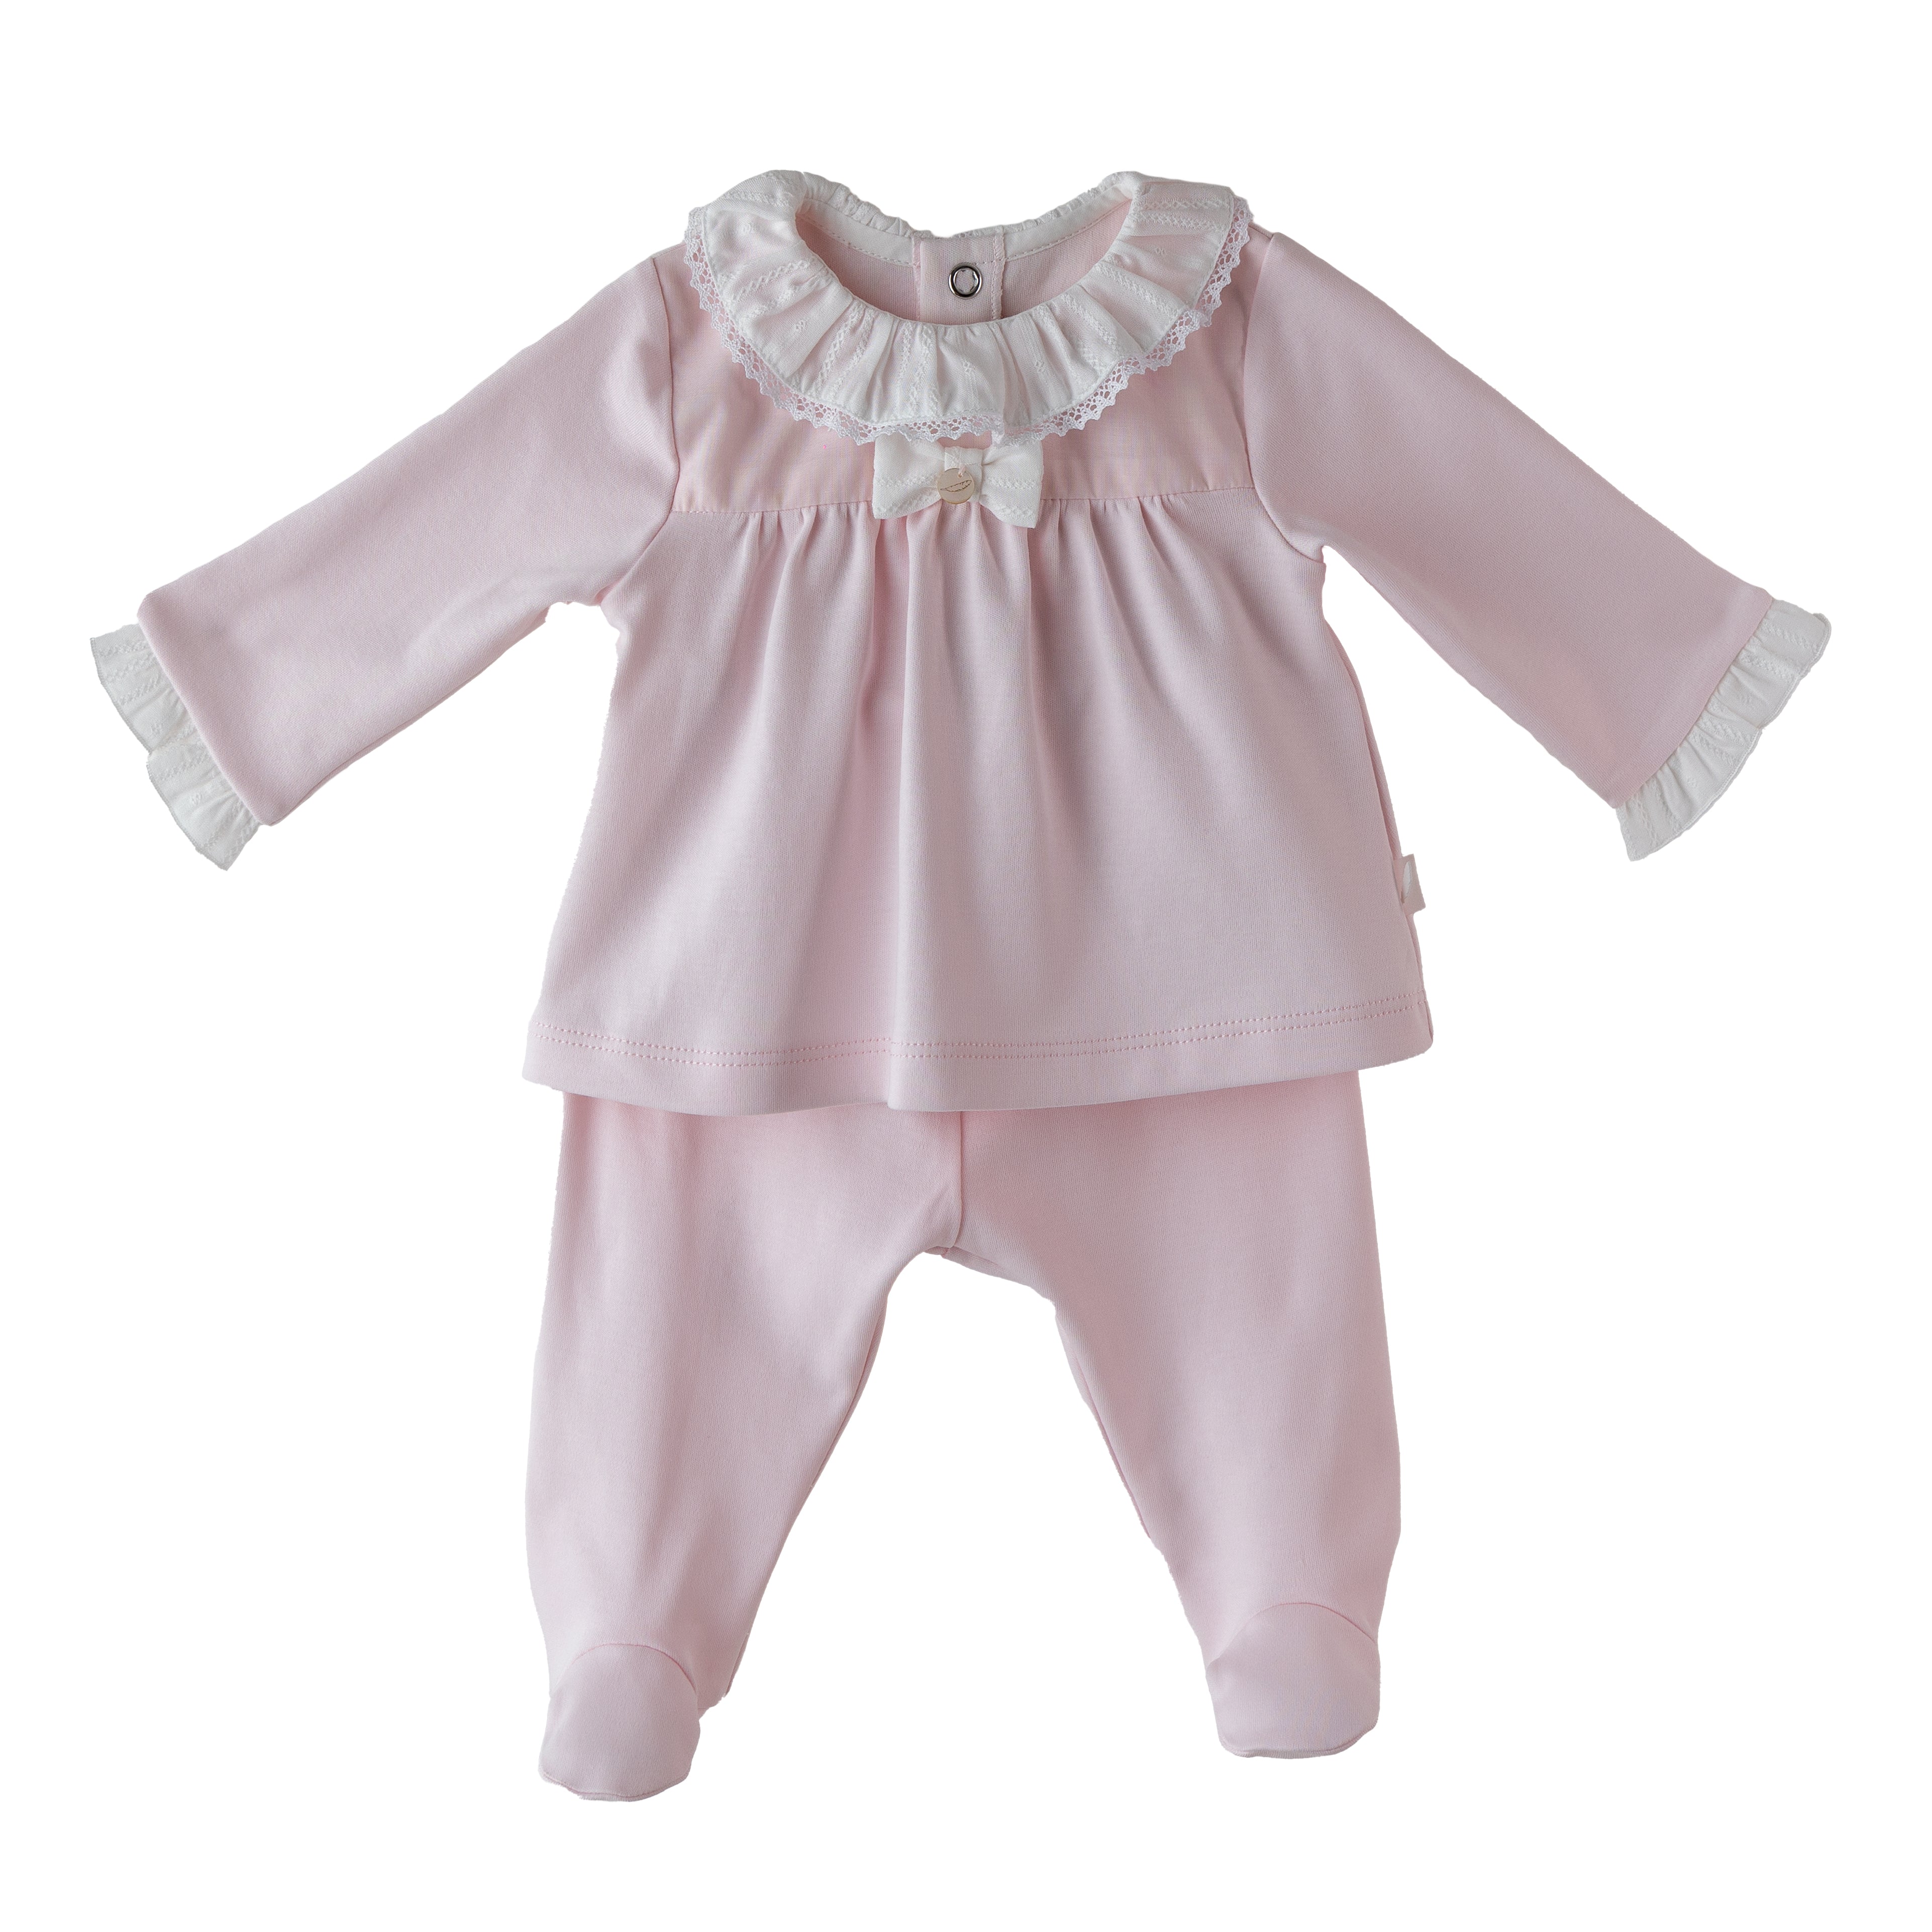 Two-Piece Set - Pink Cotton with Bow